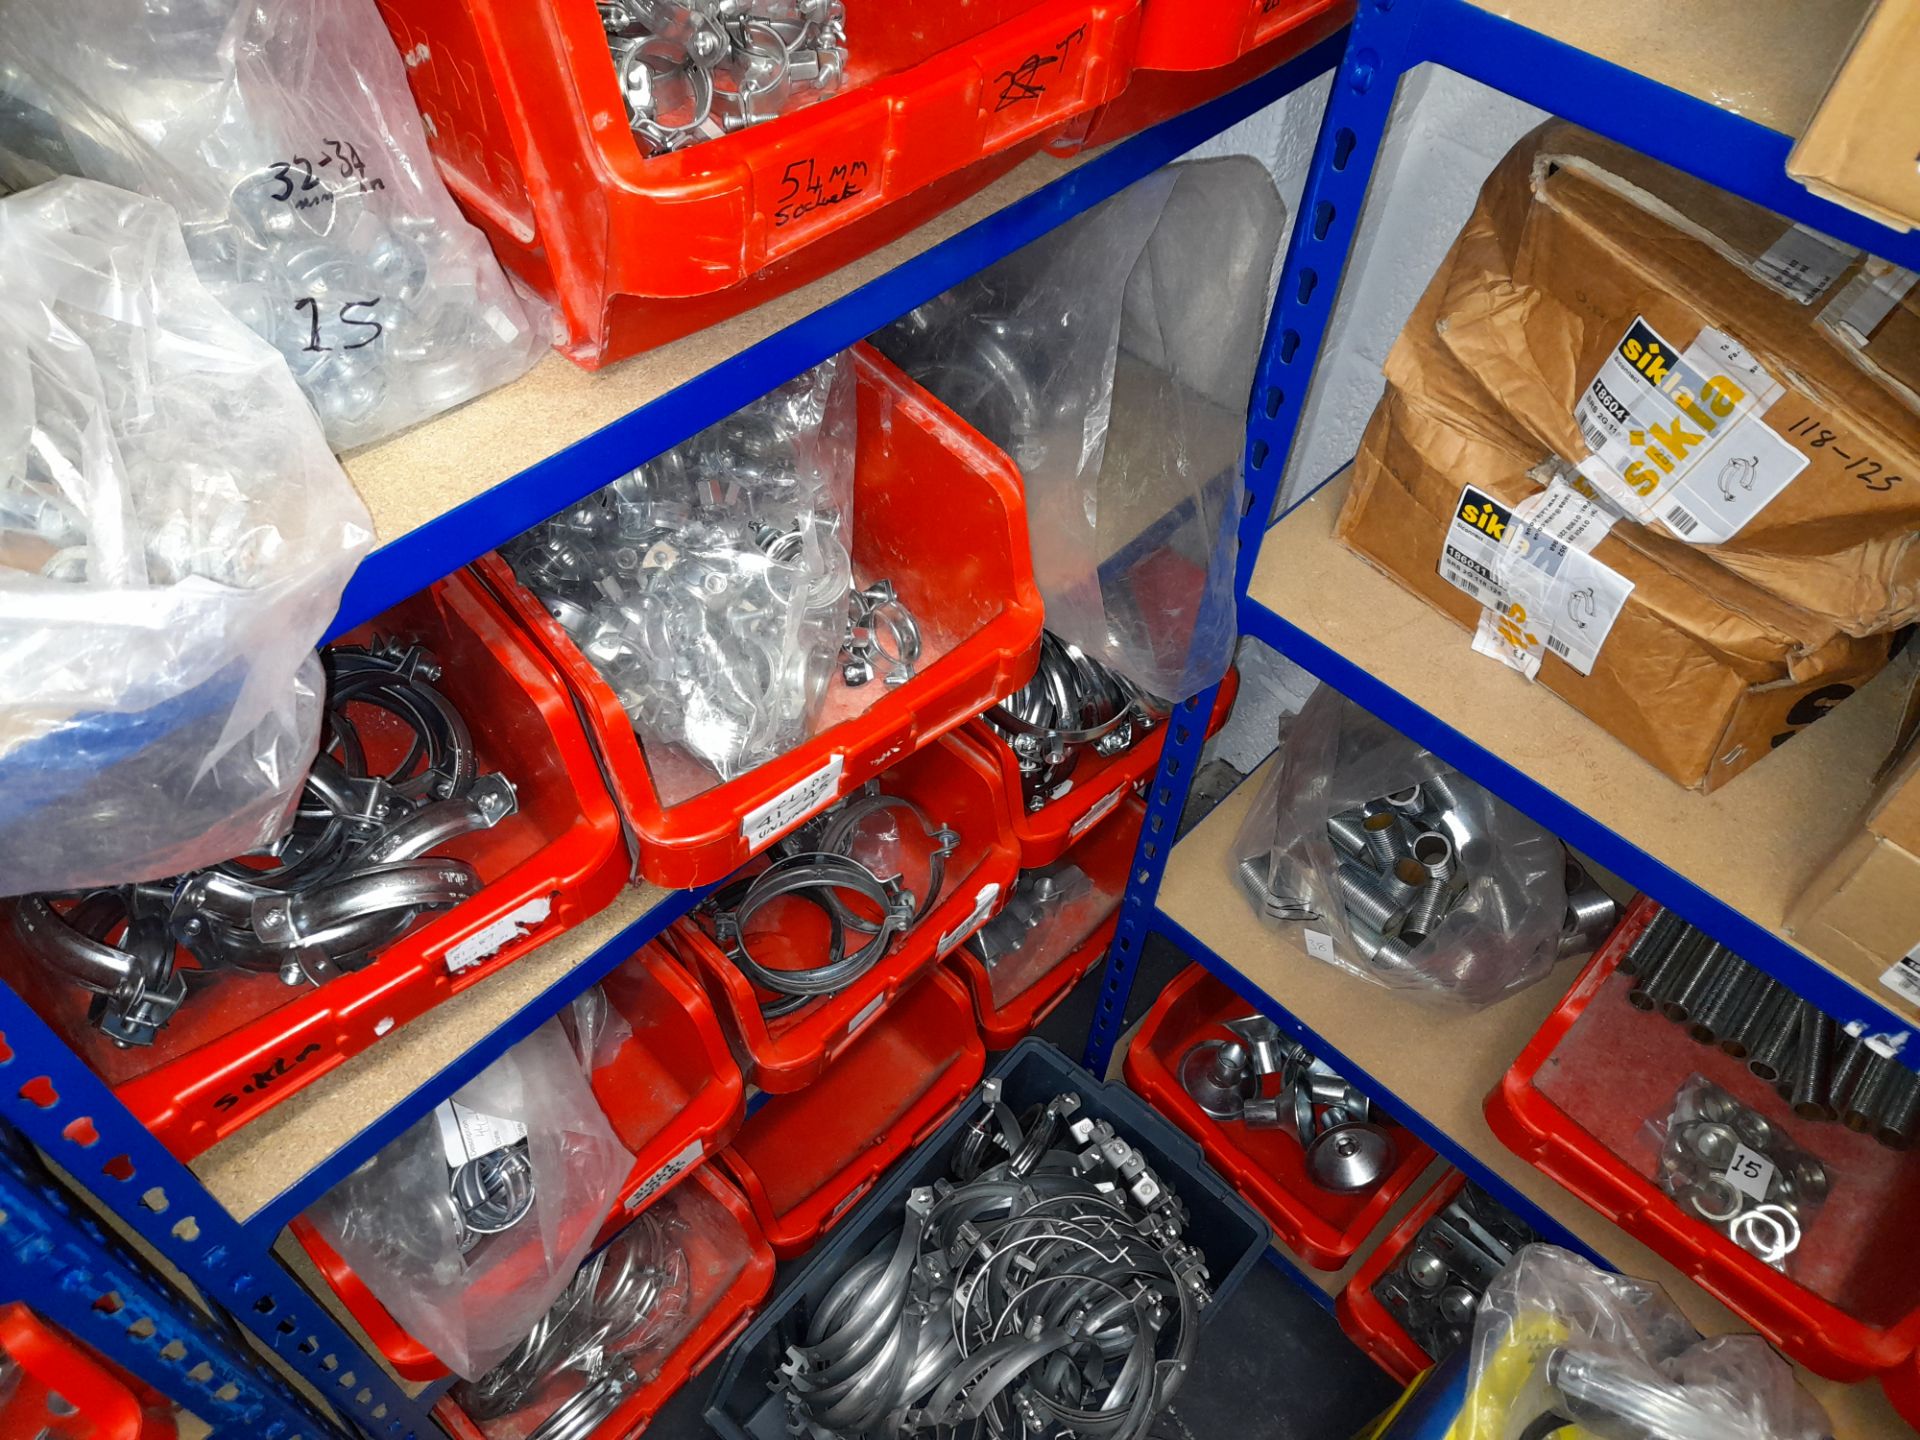 Large Quantity of stock to 13 bays, bolts, nuts, clamps, bracketry, fittings, washers, plastic - Image 14 of 41